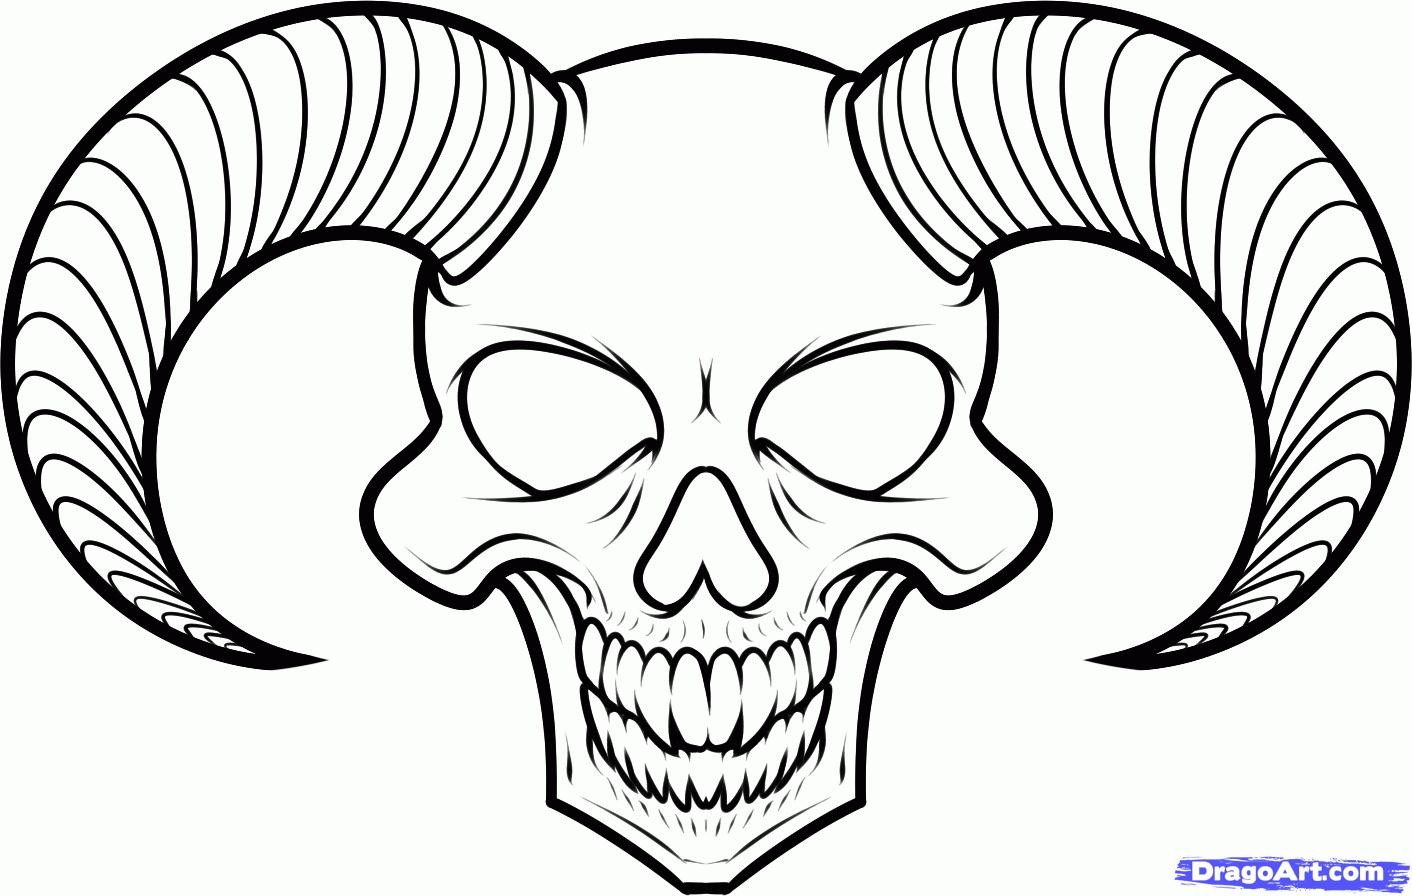 cool easy drawings of skulls | 3 Decoration